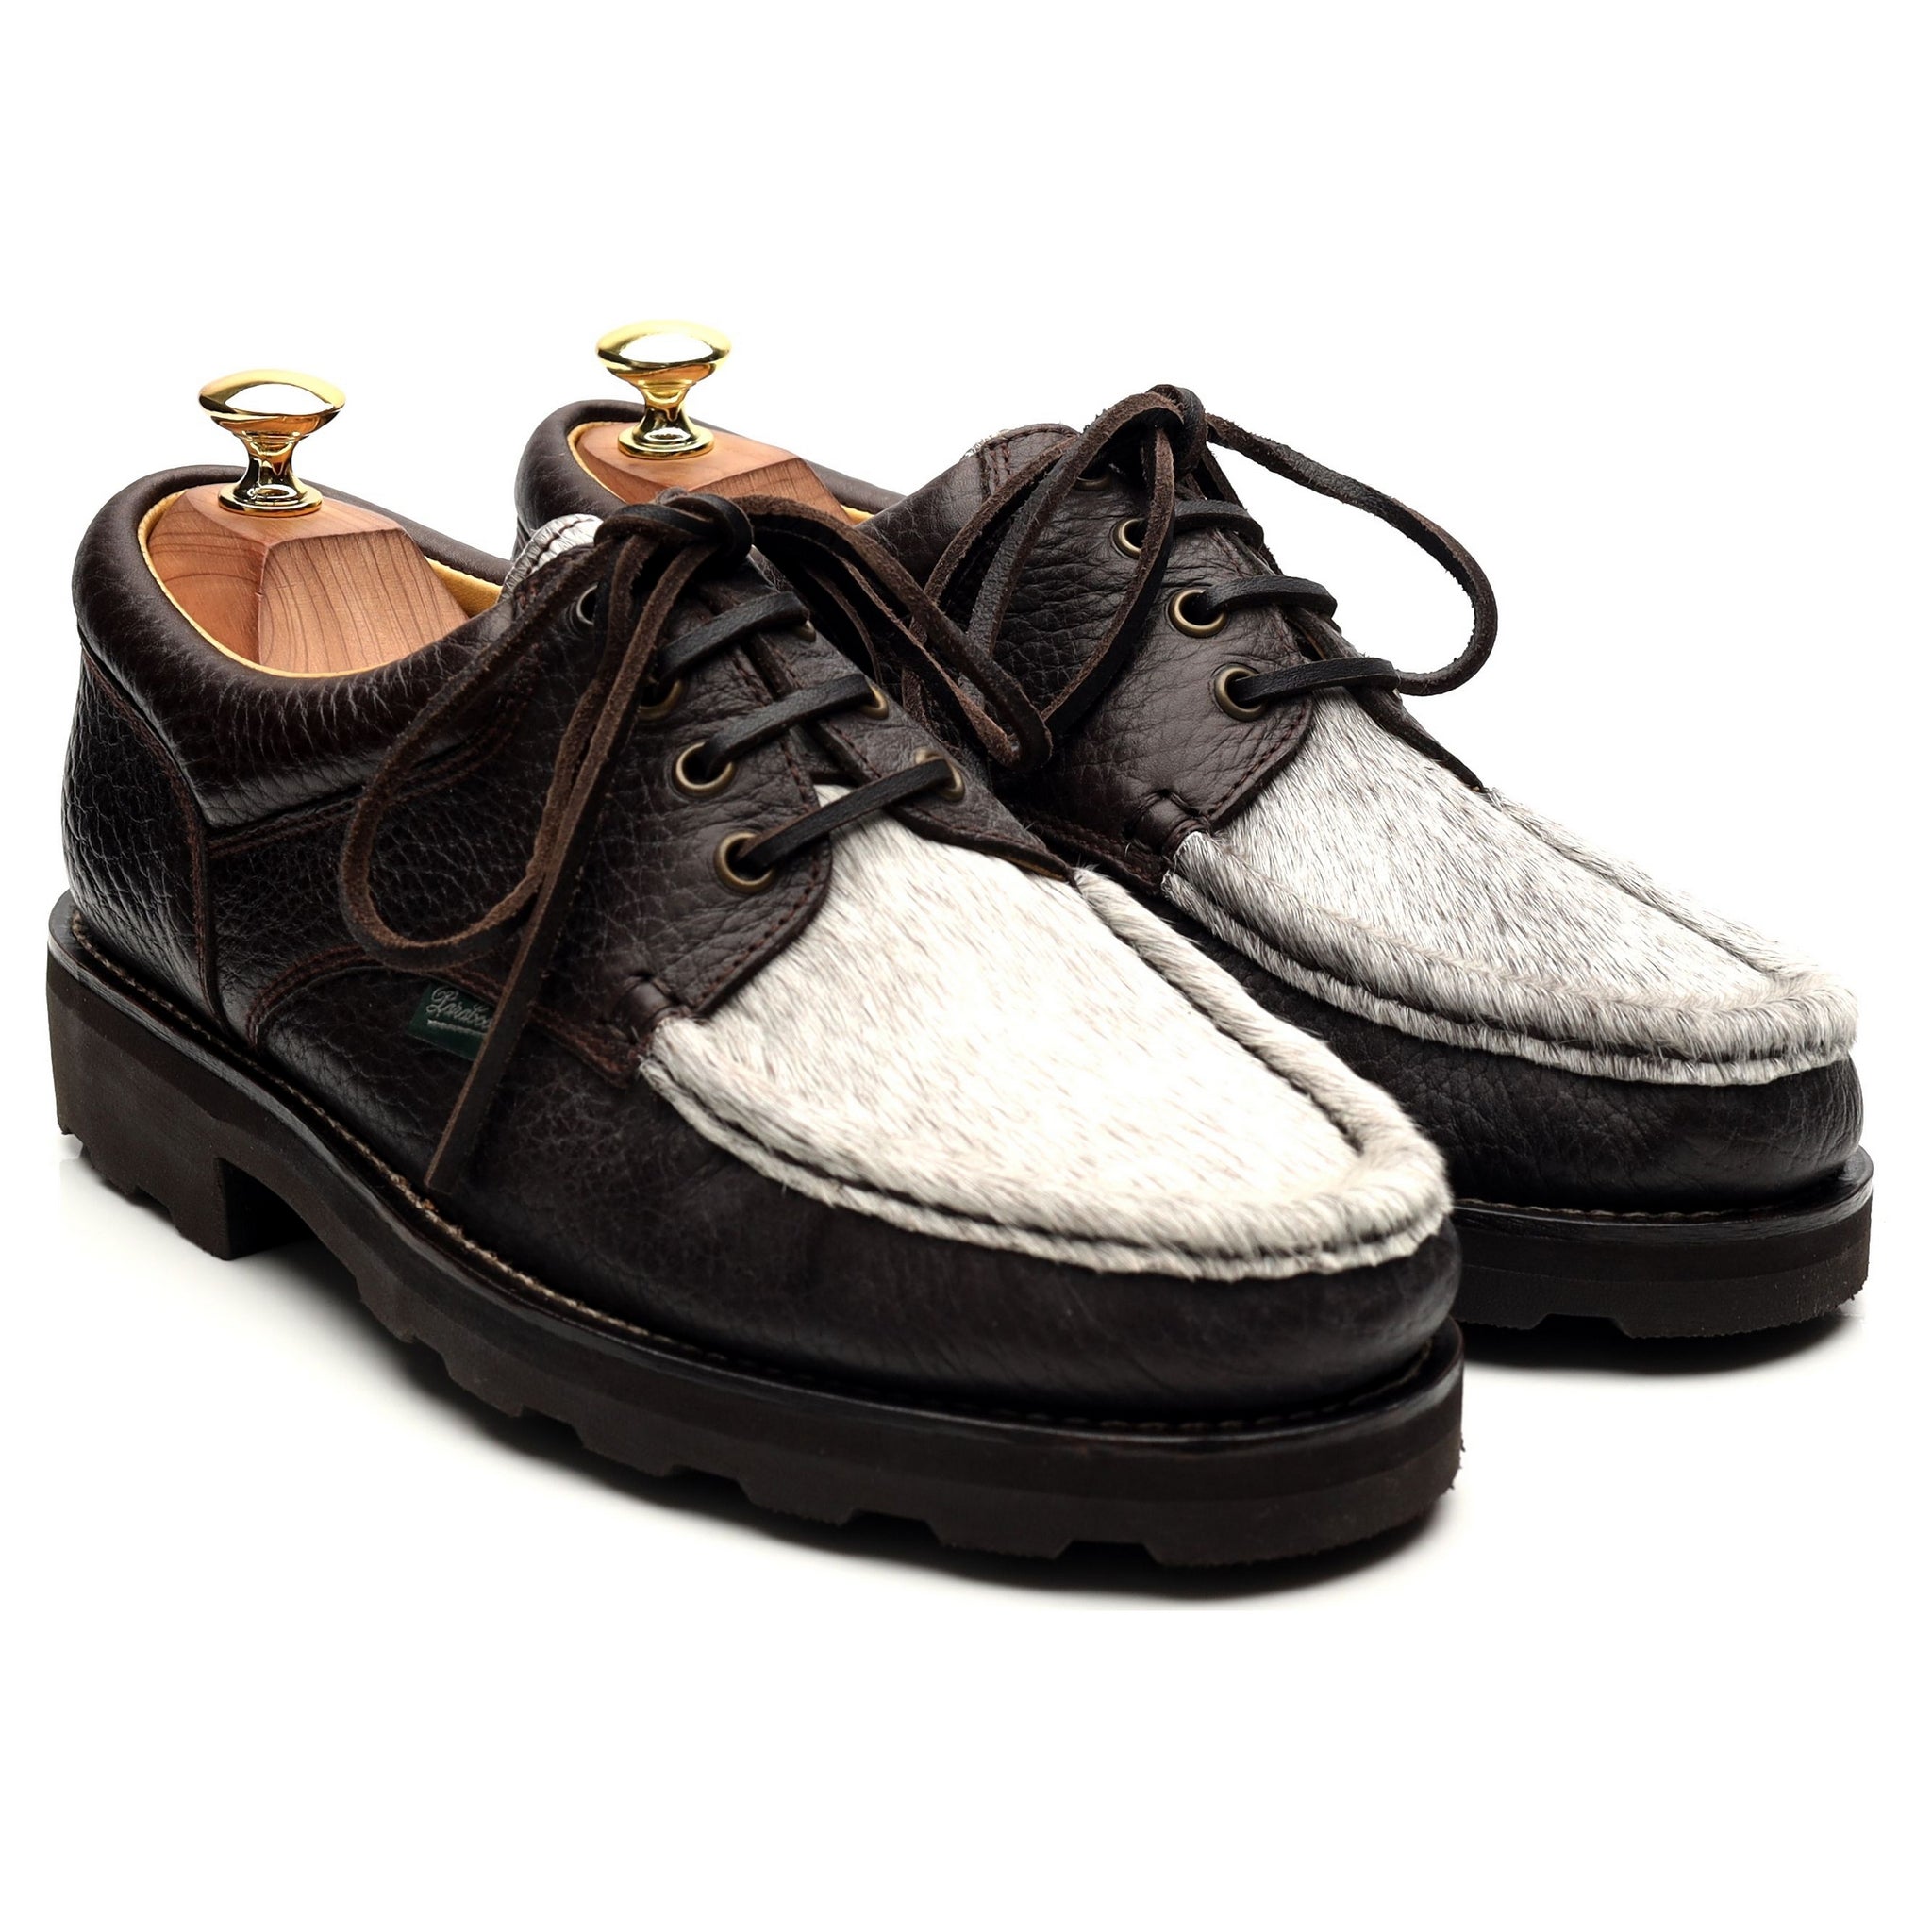 Thiers' Dark Brown Leather Deck Shoes UK 8 - Abbot's Shoes